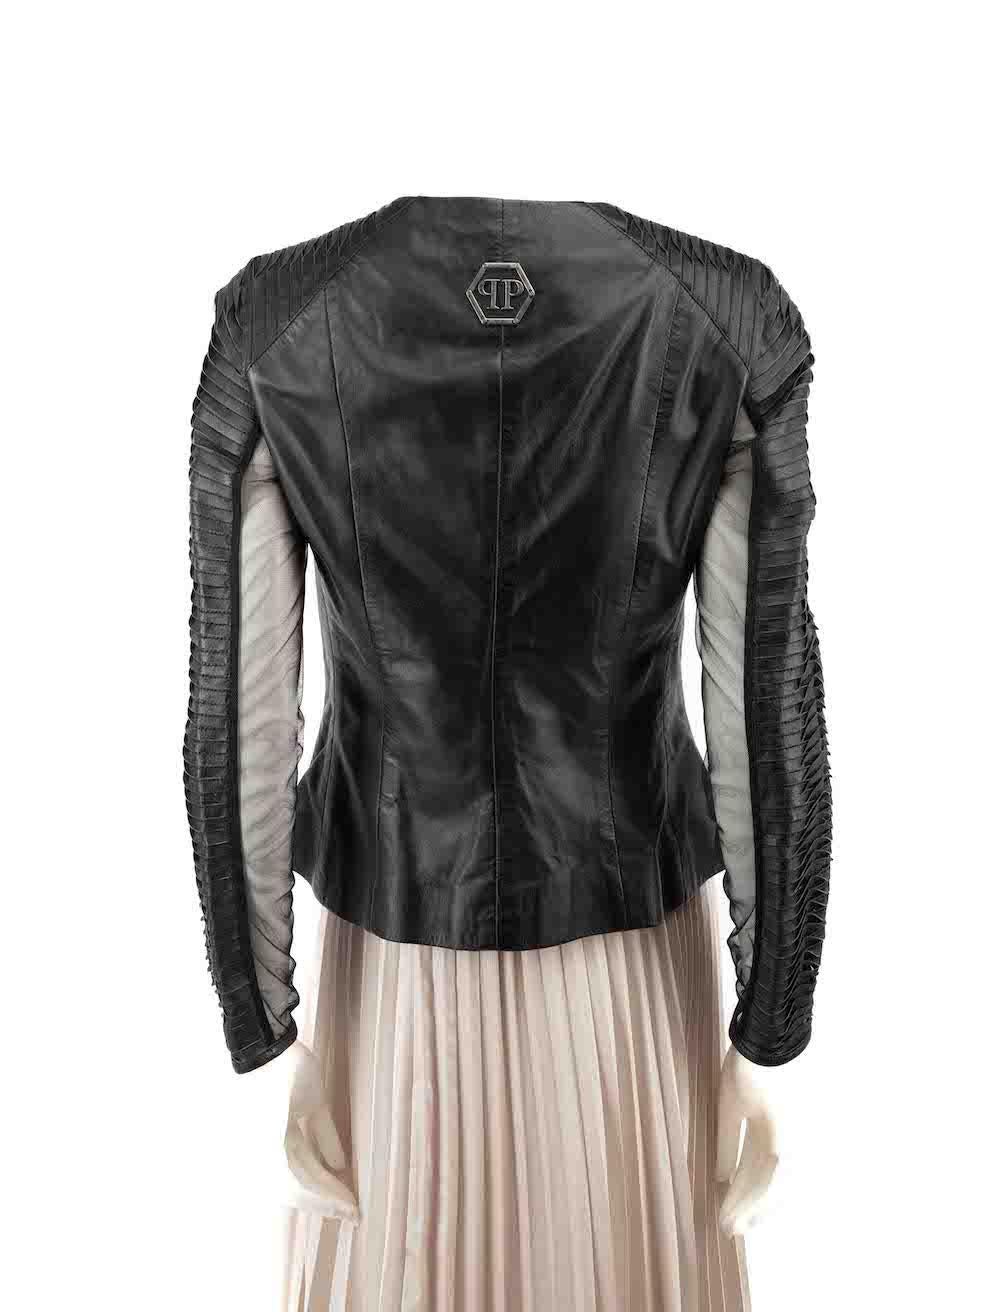 Philipp Plein Black Leather Sheer Sleeves Jacket Size L In Good Condition For Sale In London, GB